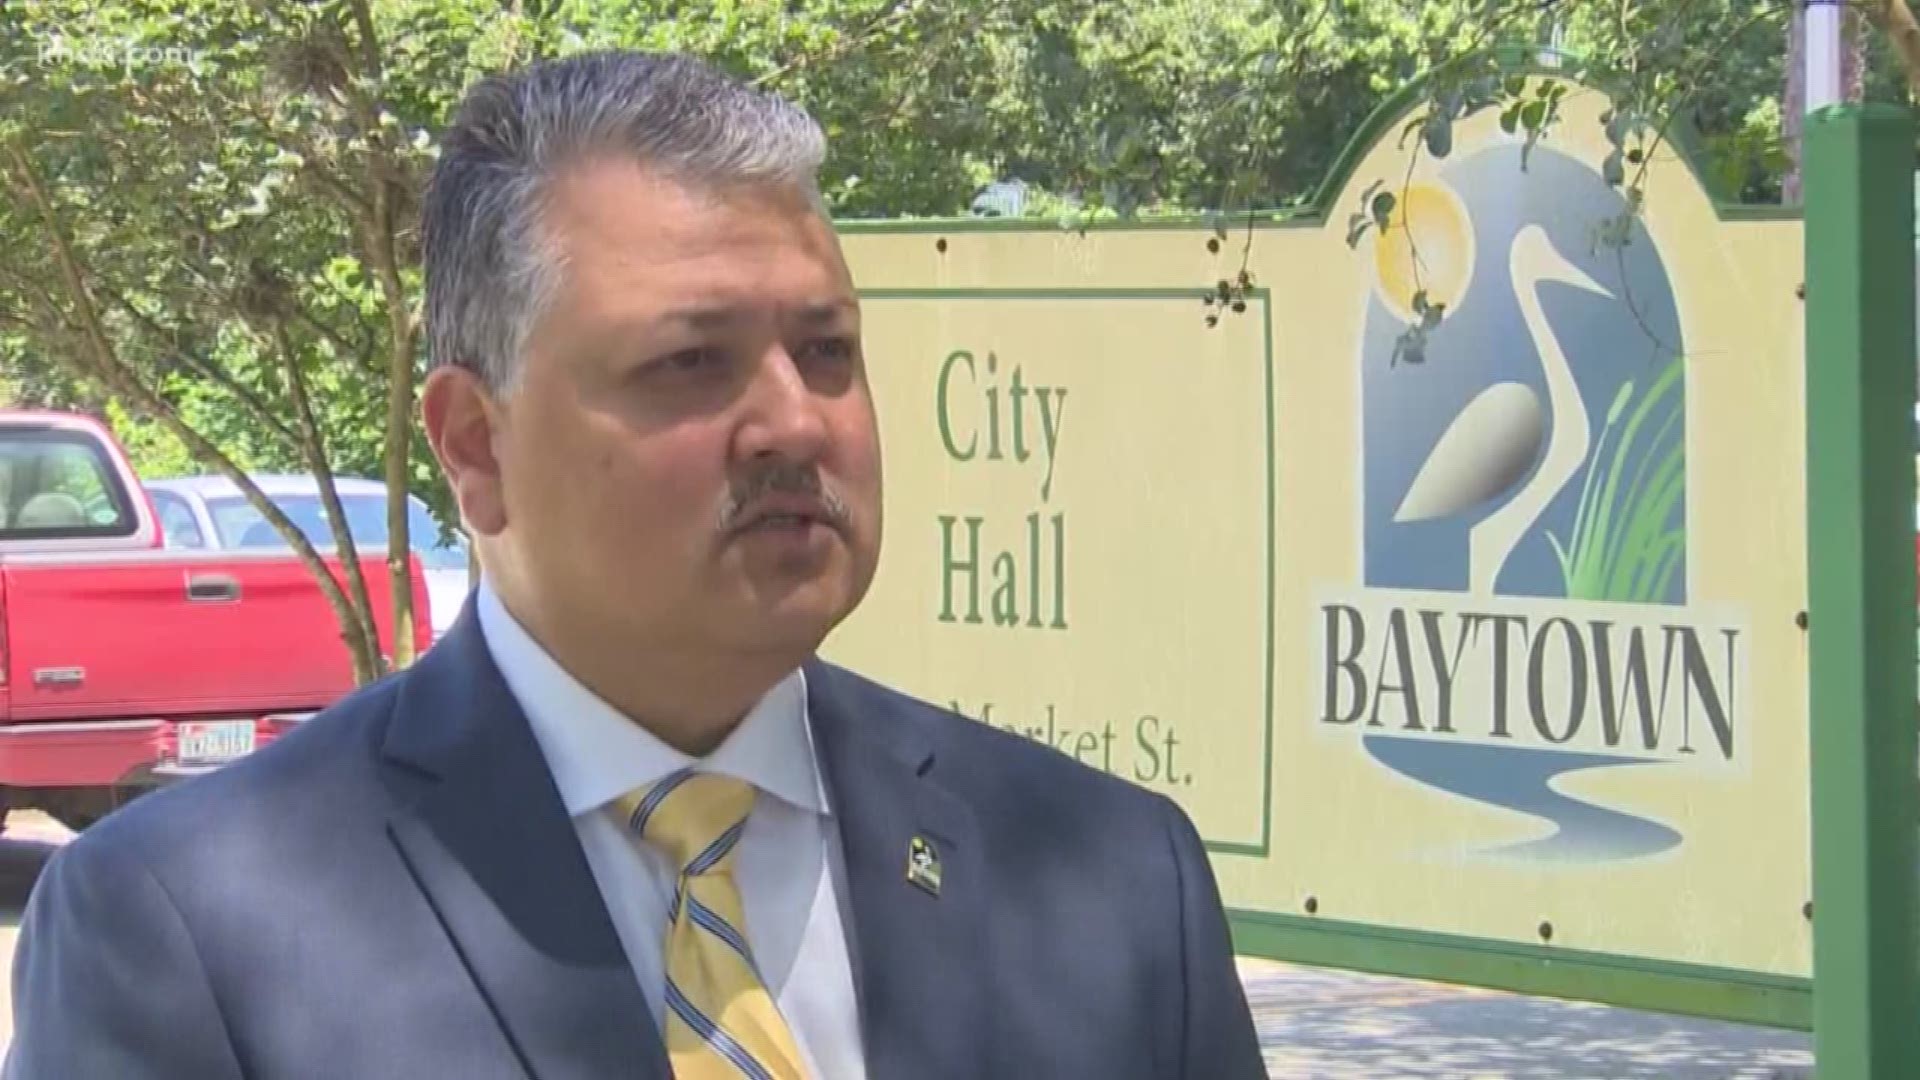 The mayor of Baytown is asking for protesters to protest peacefully as the investigation continues into a deadly officer-involved shooting.